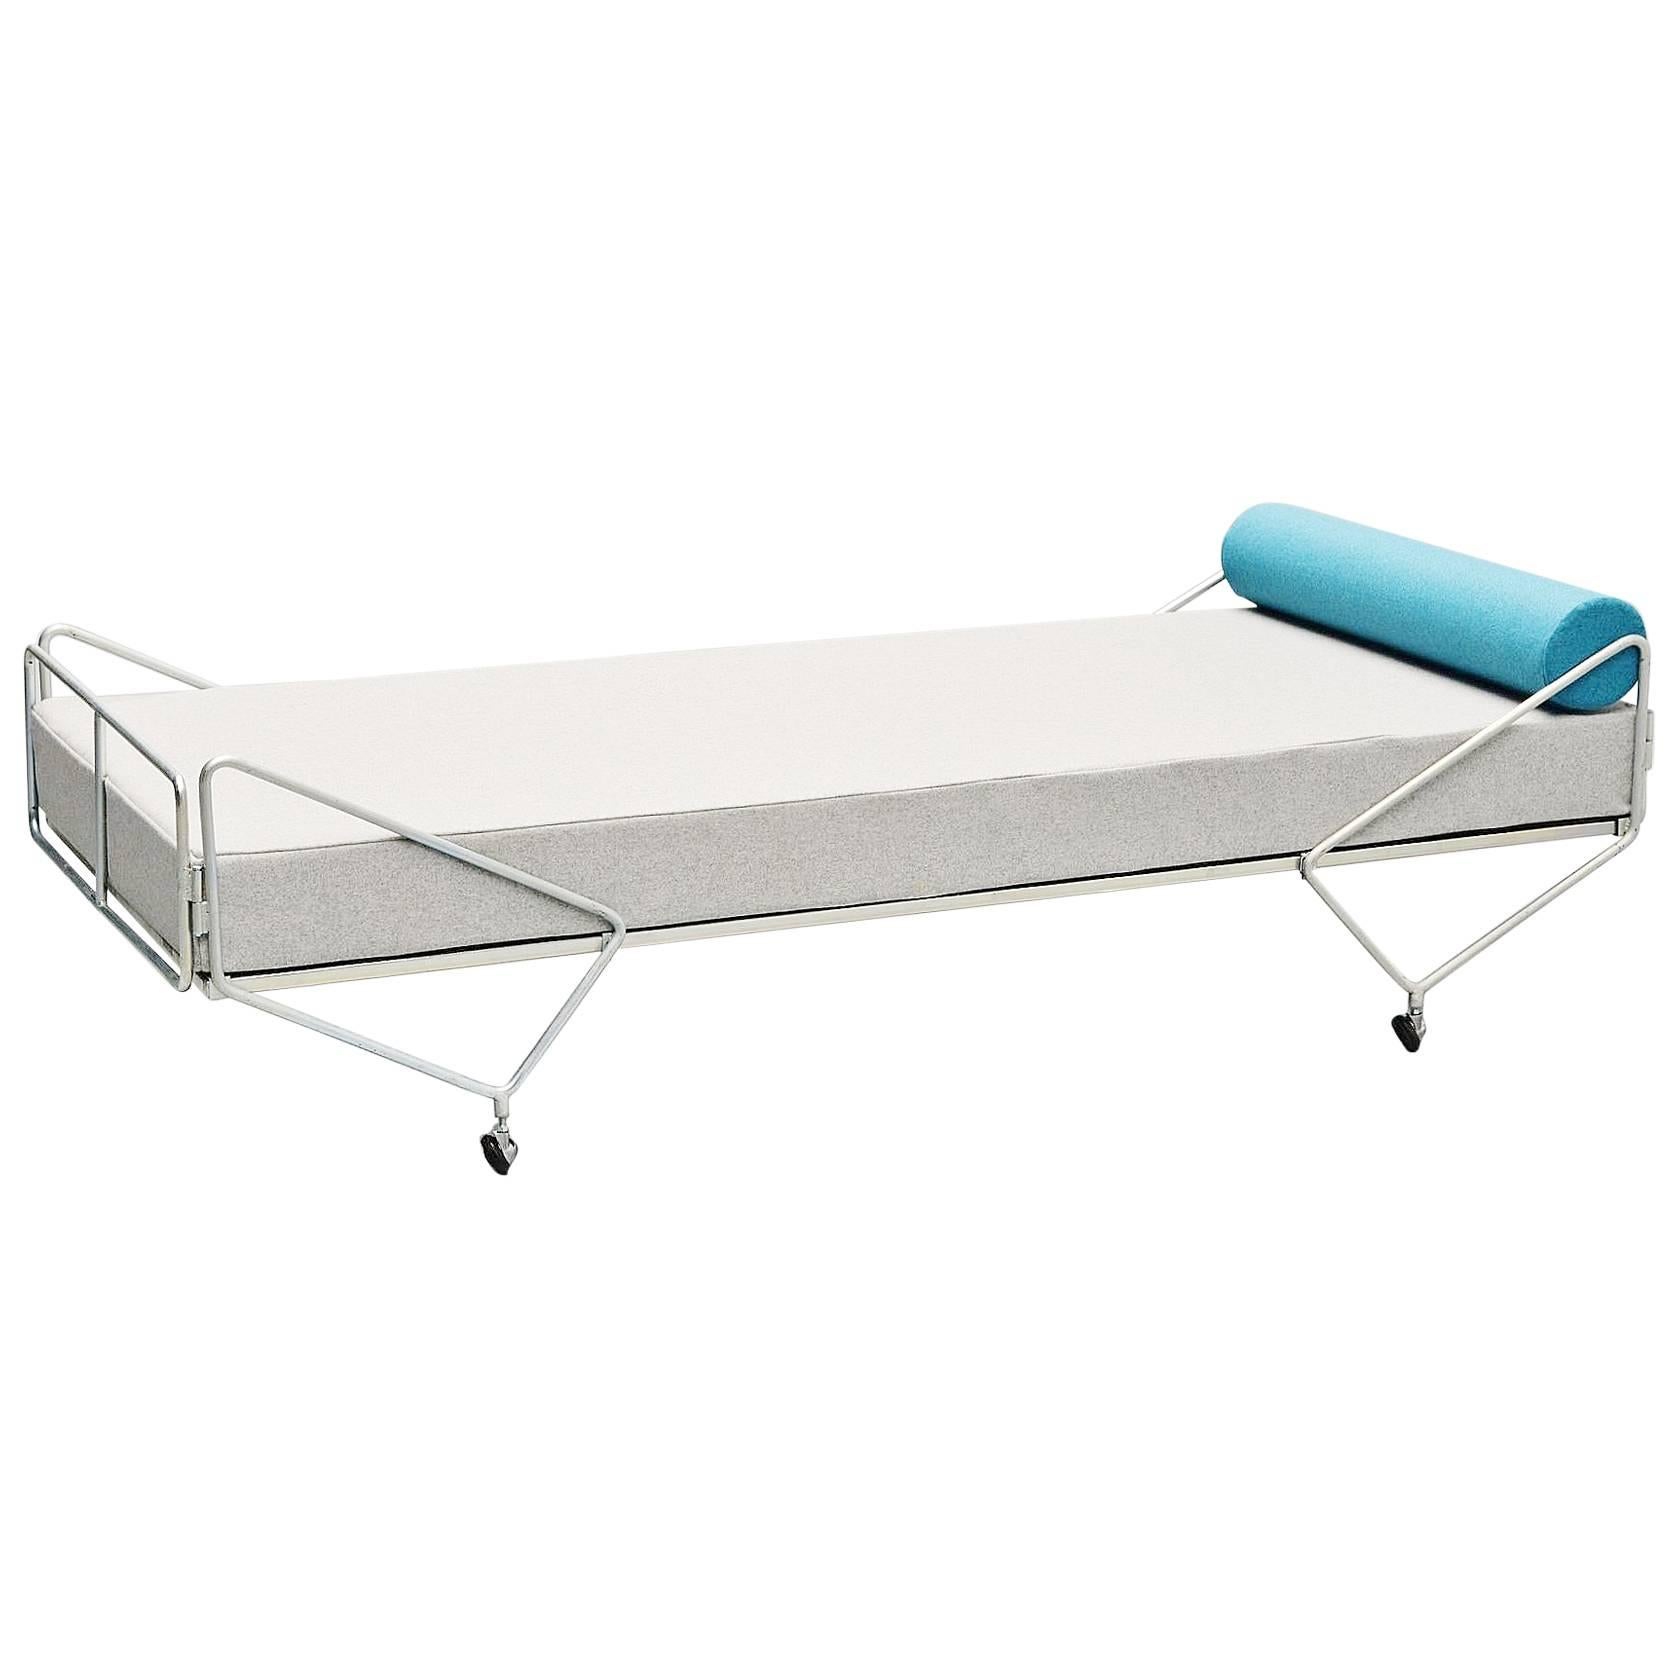 Gio Ponti Apta Daybed Made by Walter Ponti, Italy, 1970 For Sale